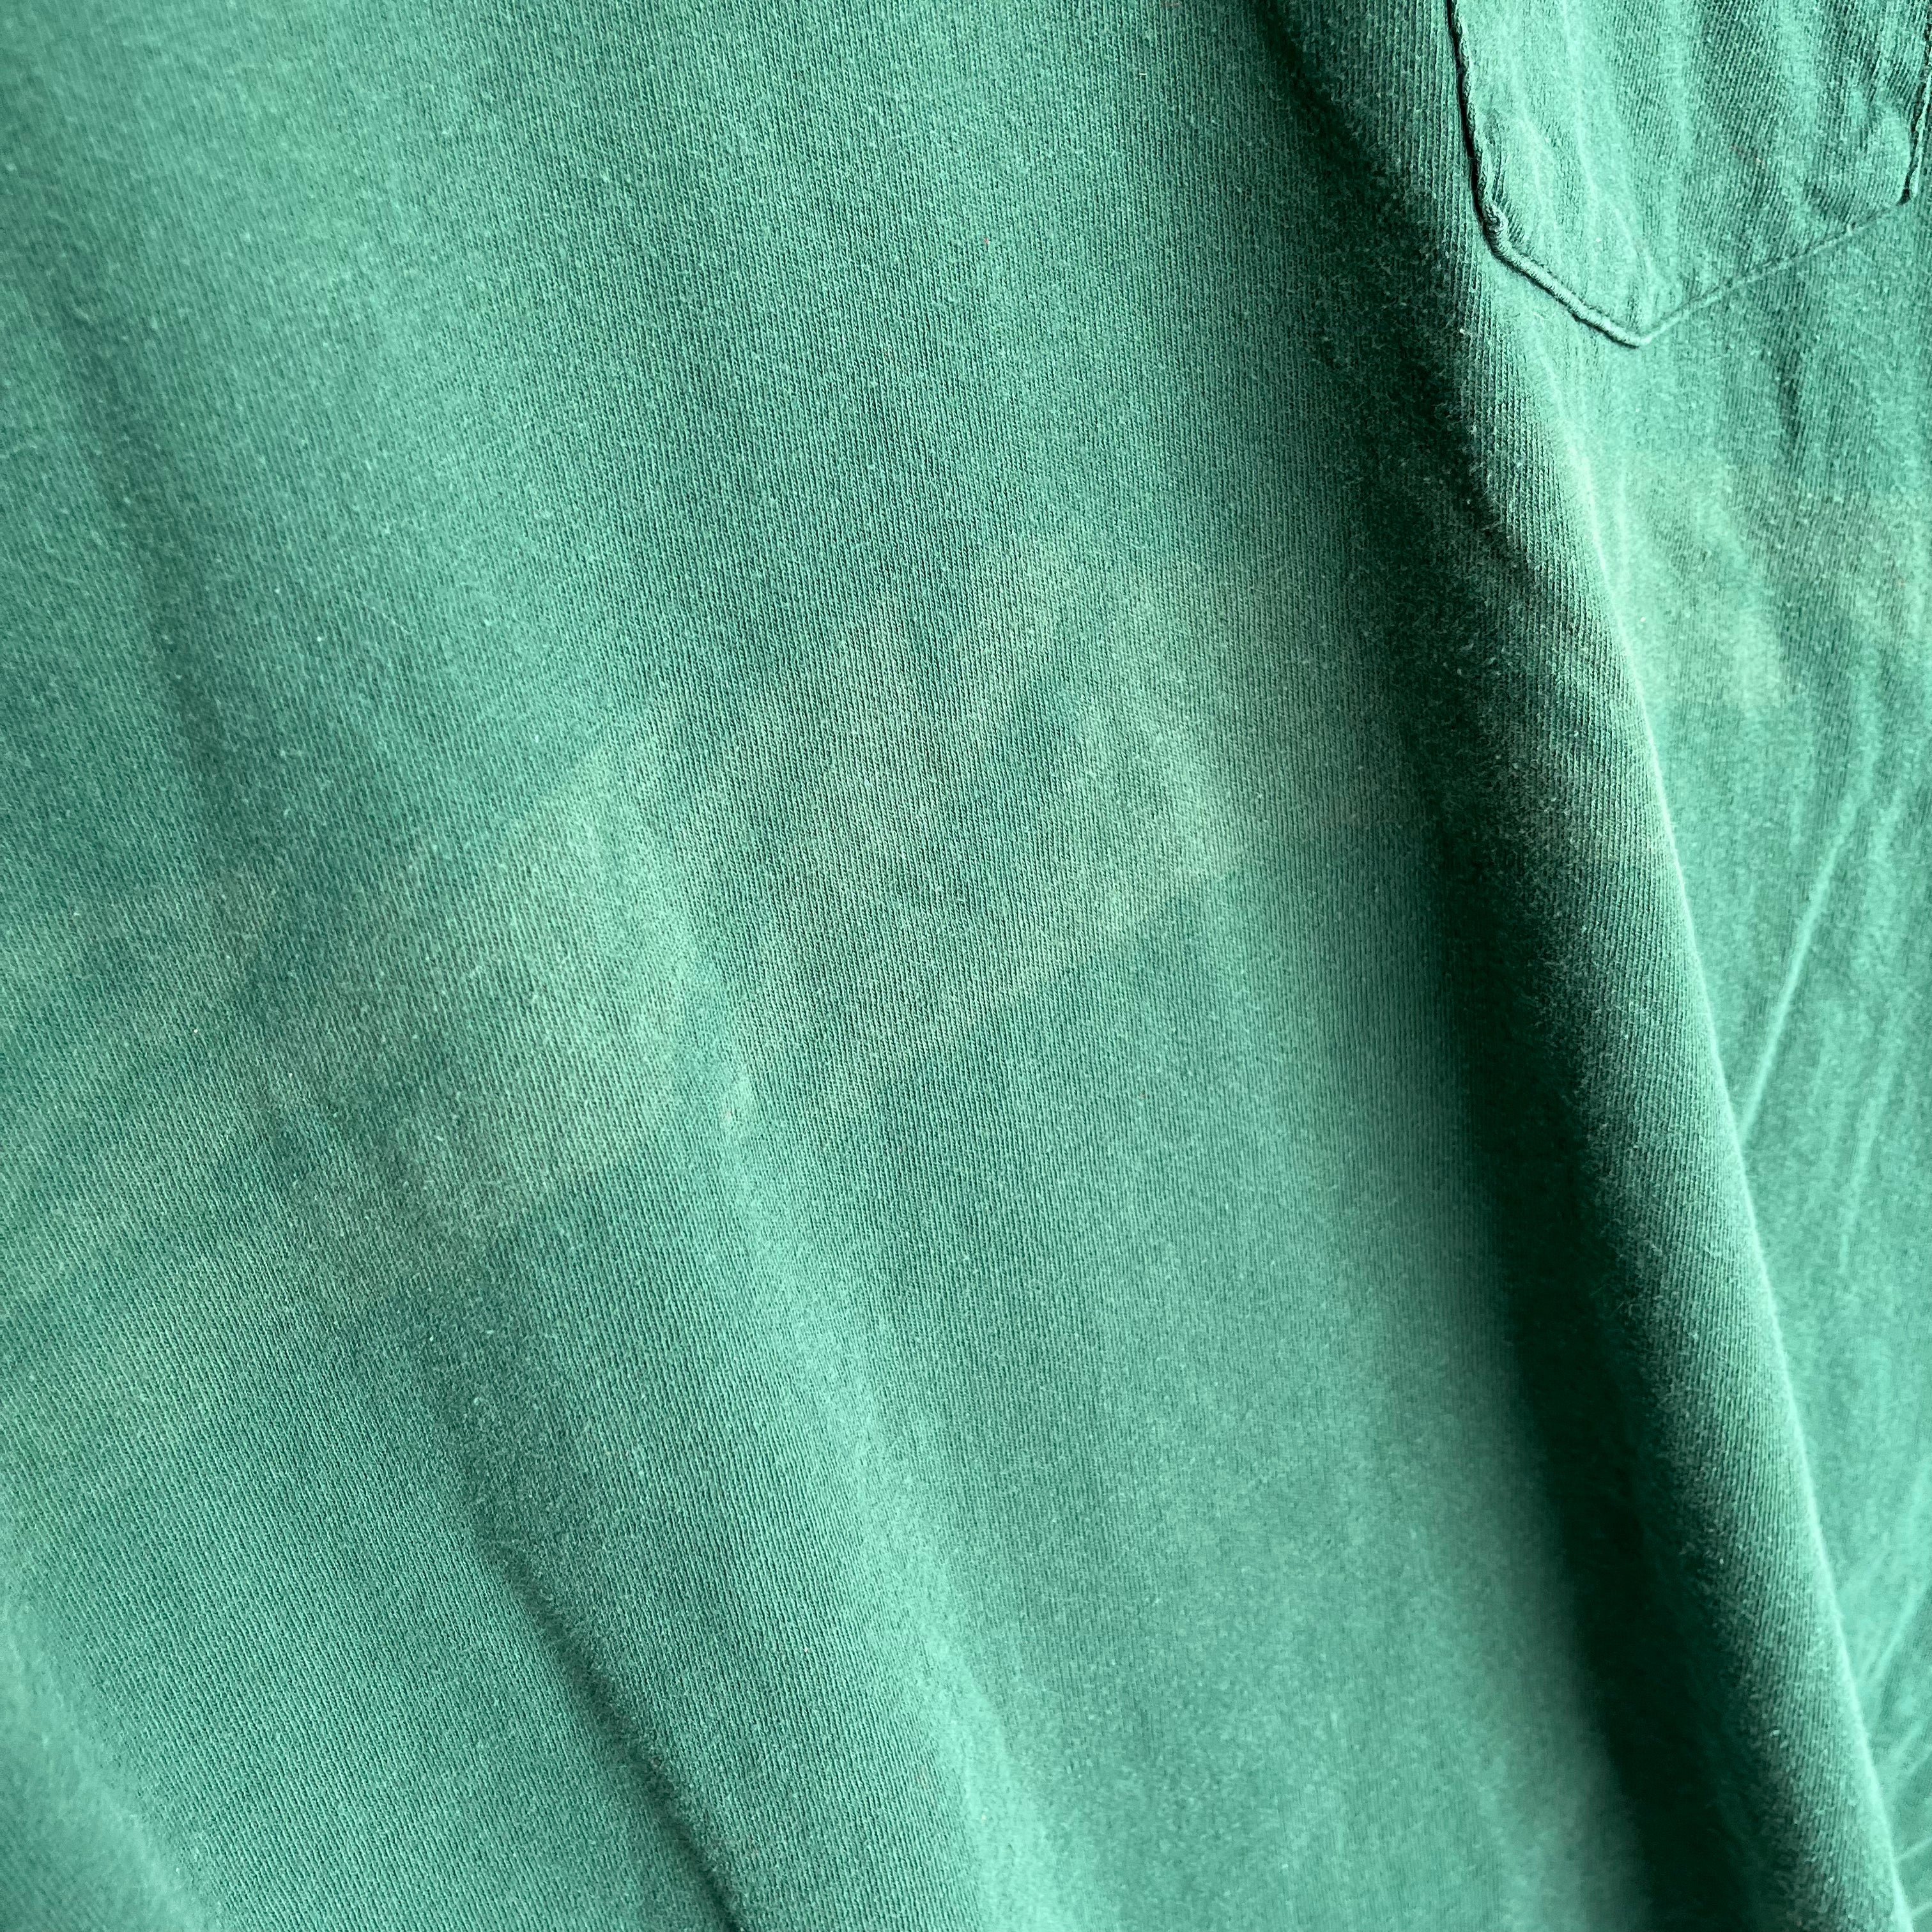 1990 Extremely Oversized Forest Green Pocket T-Shirt